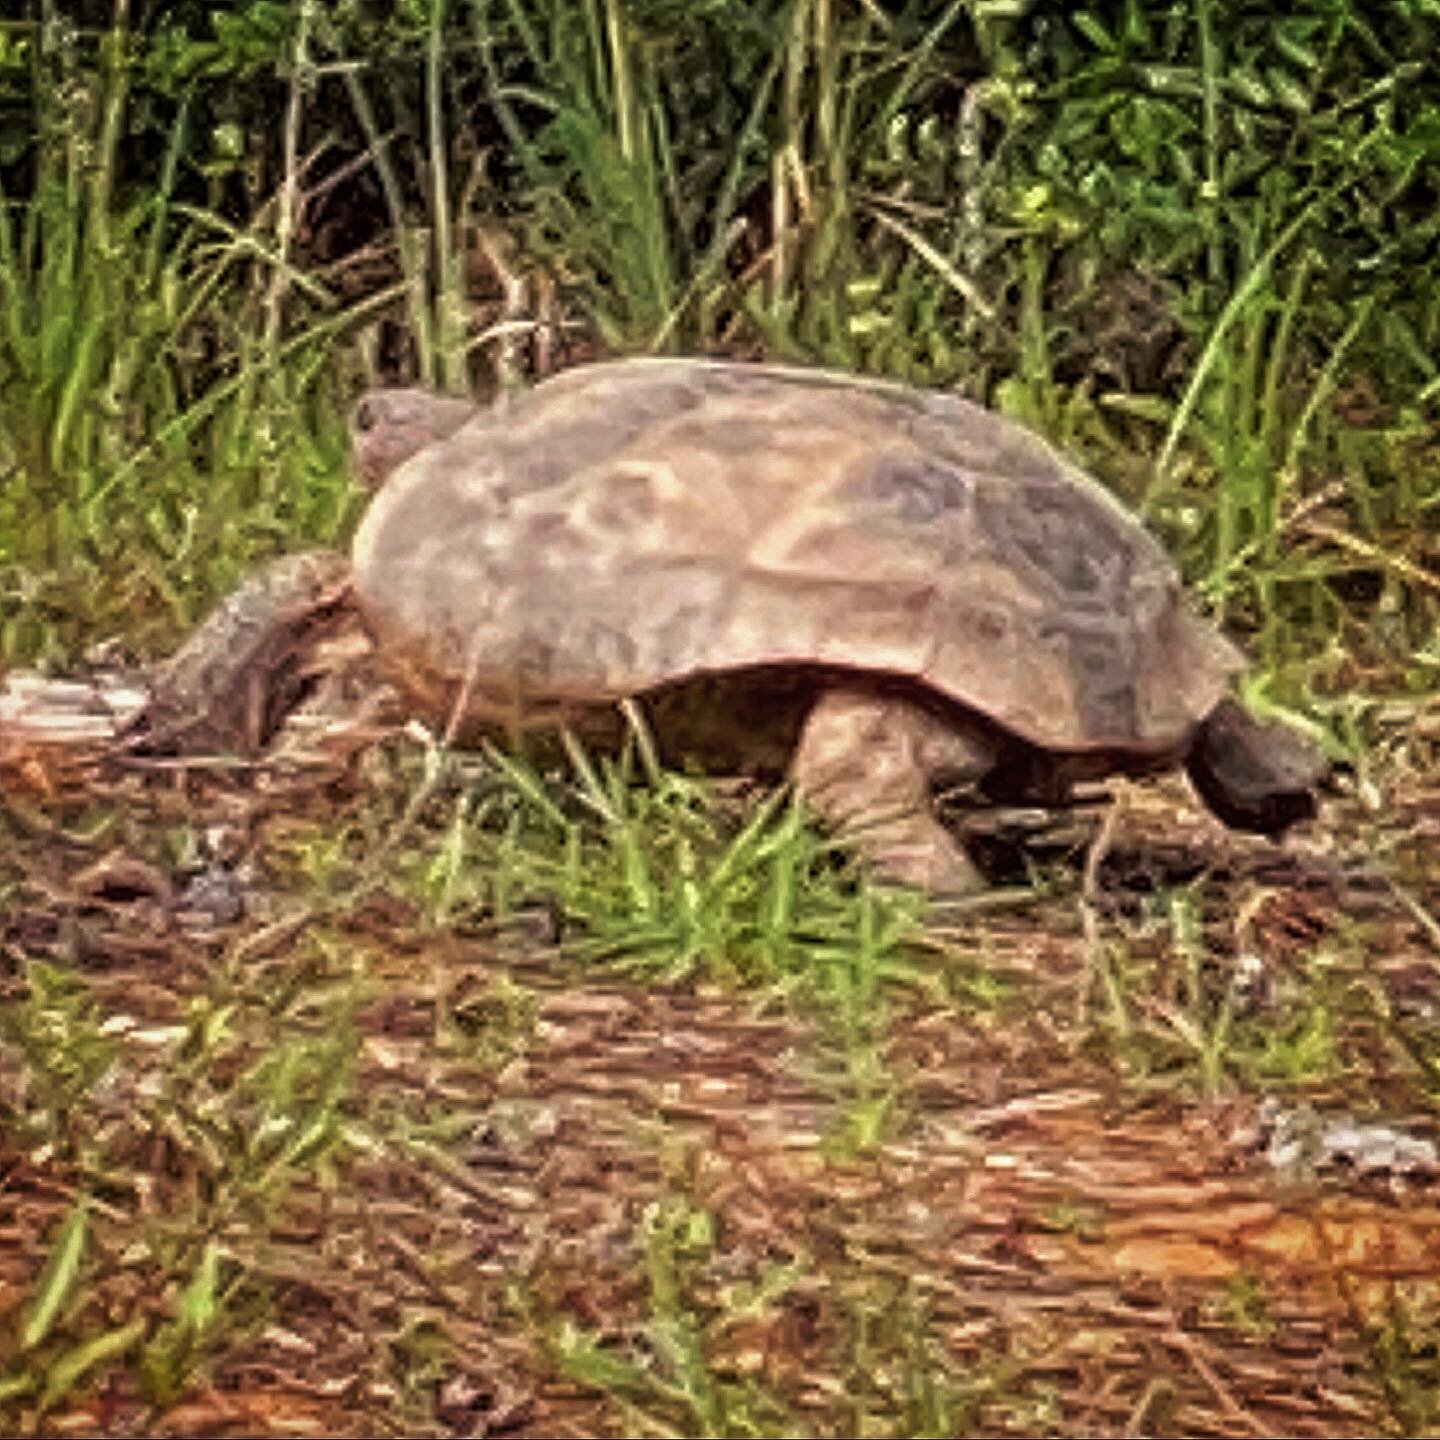 Spotted this bad boy in the &lsquo;hood today. #tortoise #mississippi